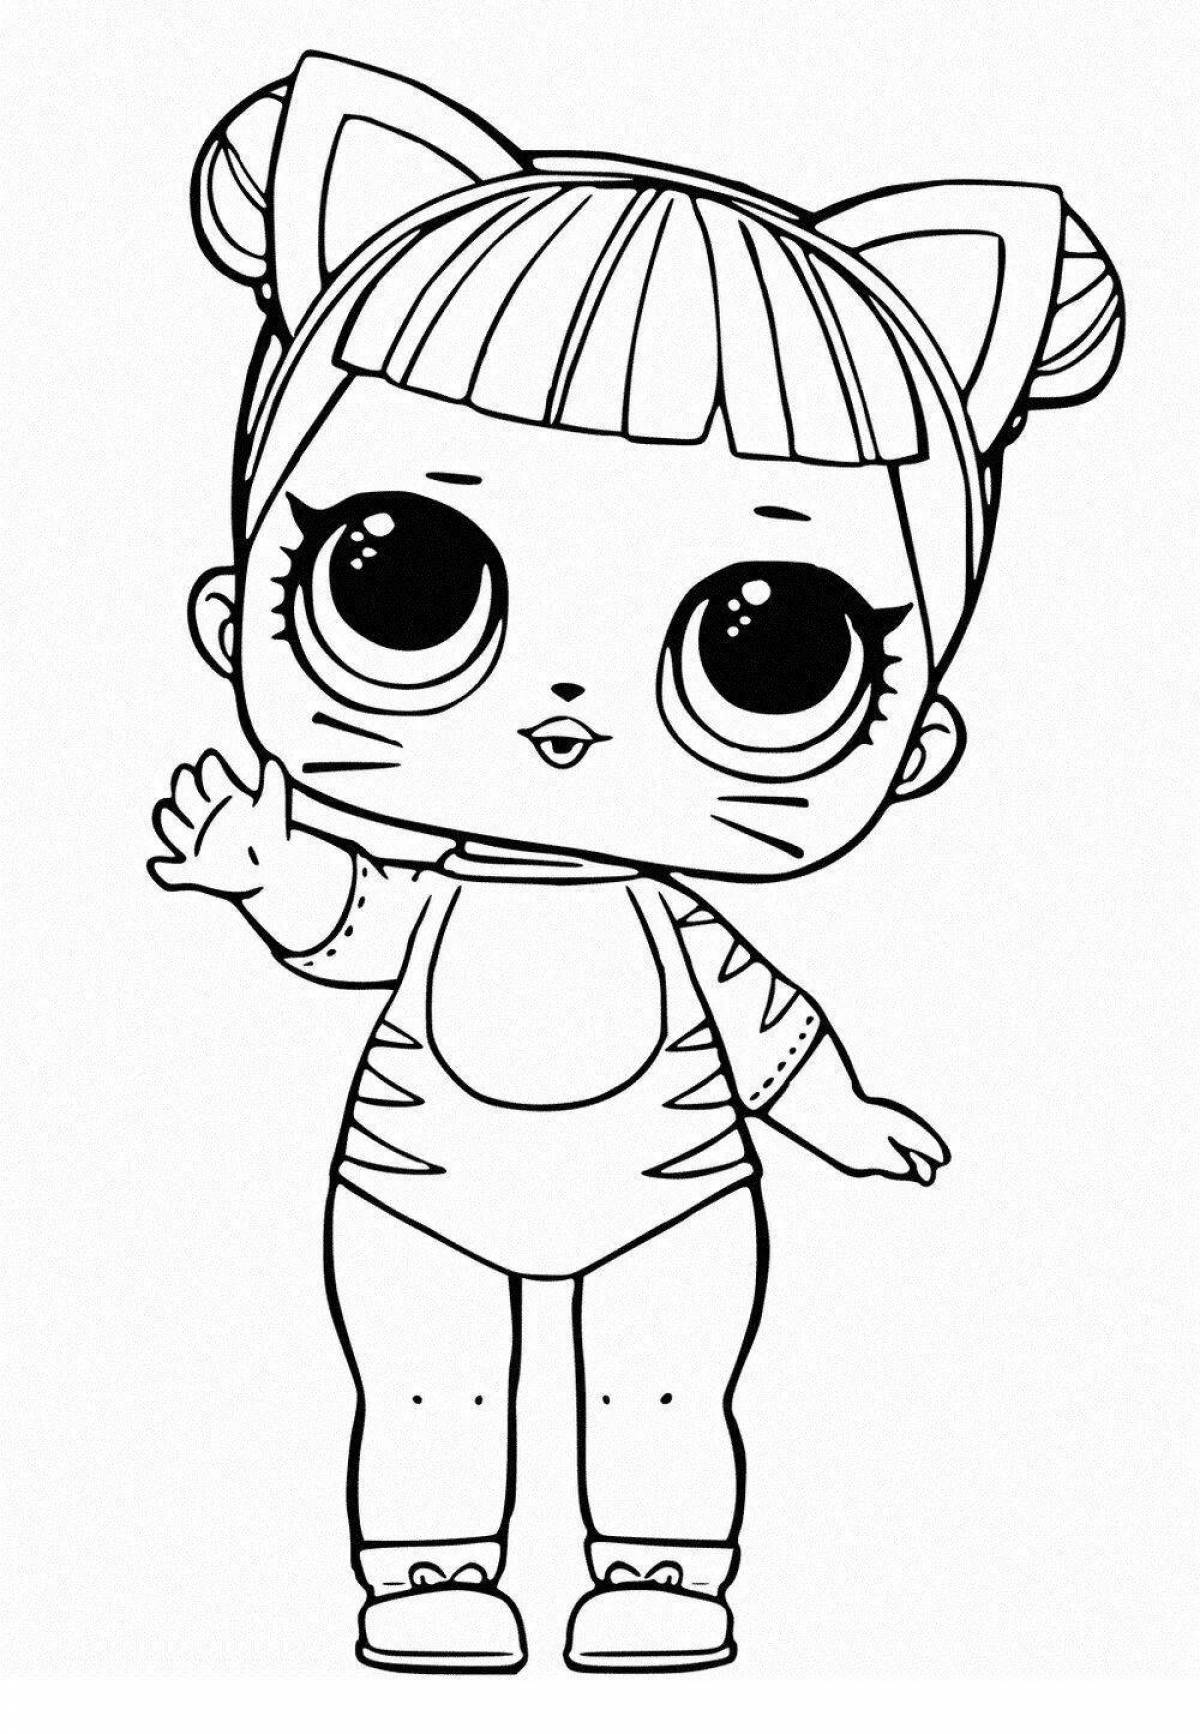 X-traordinary lol doll coloring pages